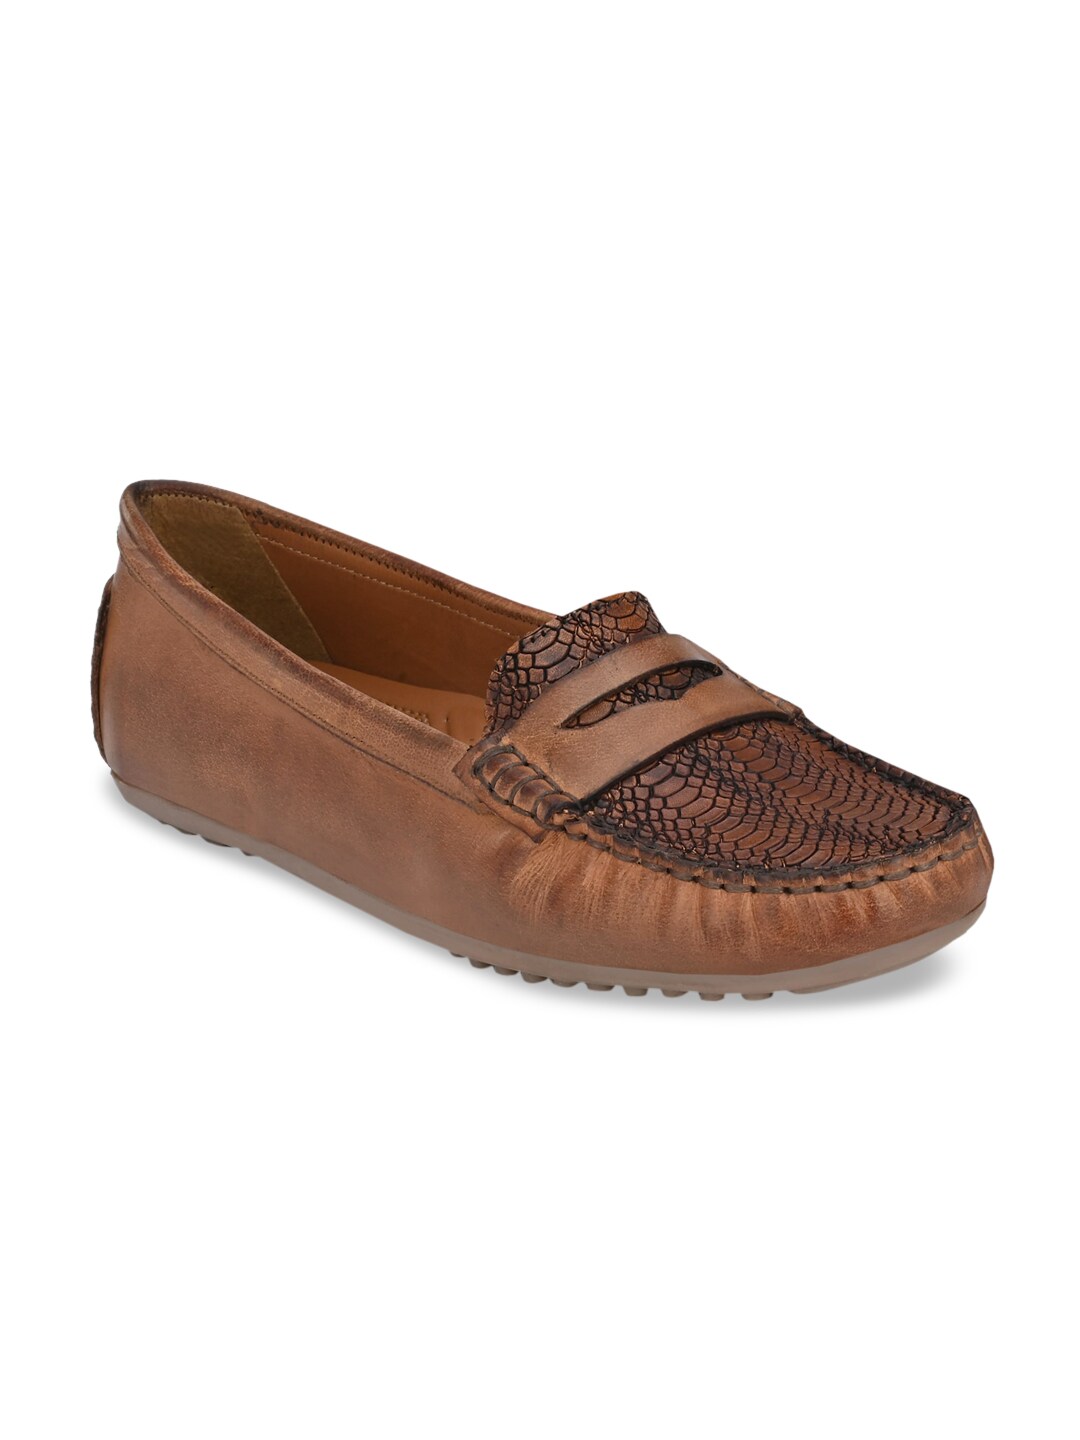 CARLO ROMANO Women Tan-Coloured Woven Design Leather Loafers Casual Shoes Price in India